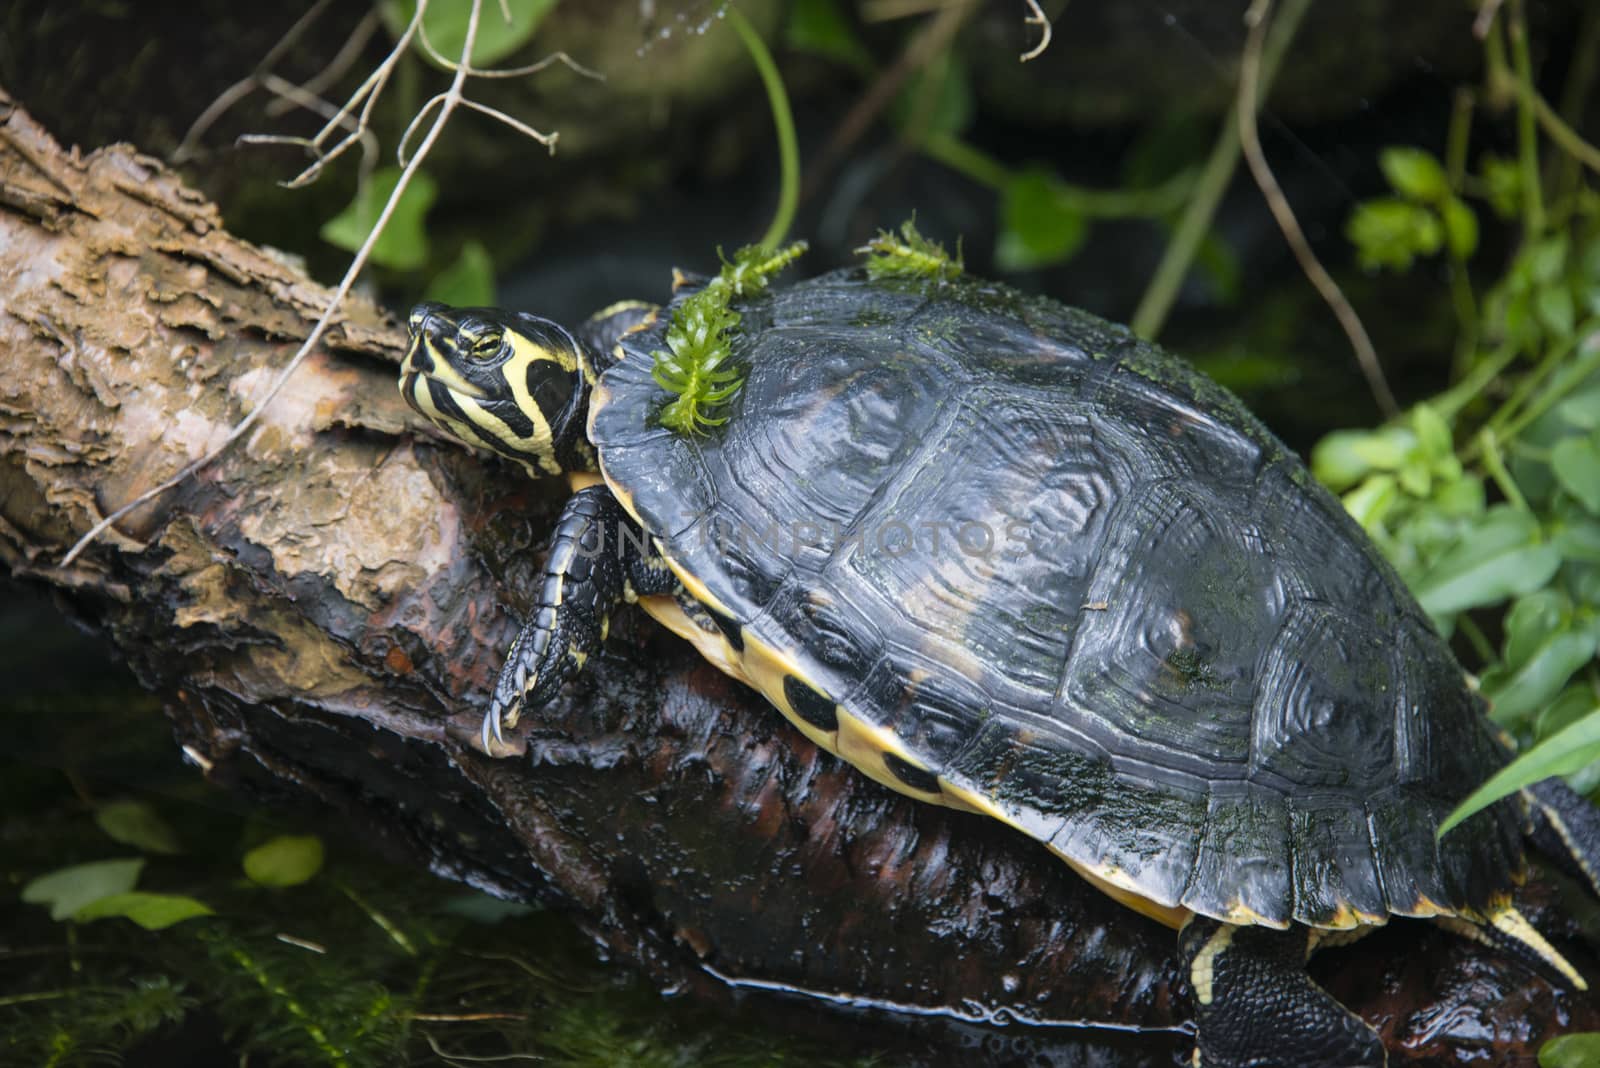 A yellow bellied slider terrapin at Pili Palas, Anglesey, North Wales